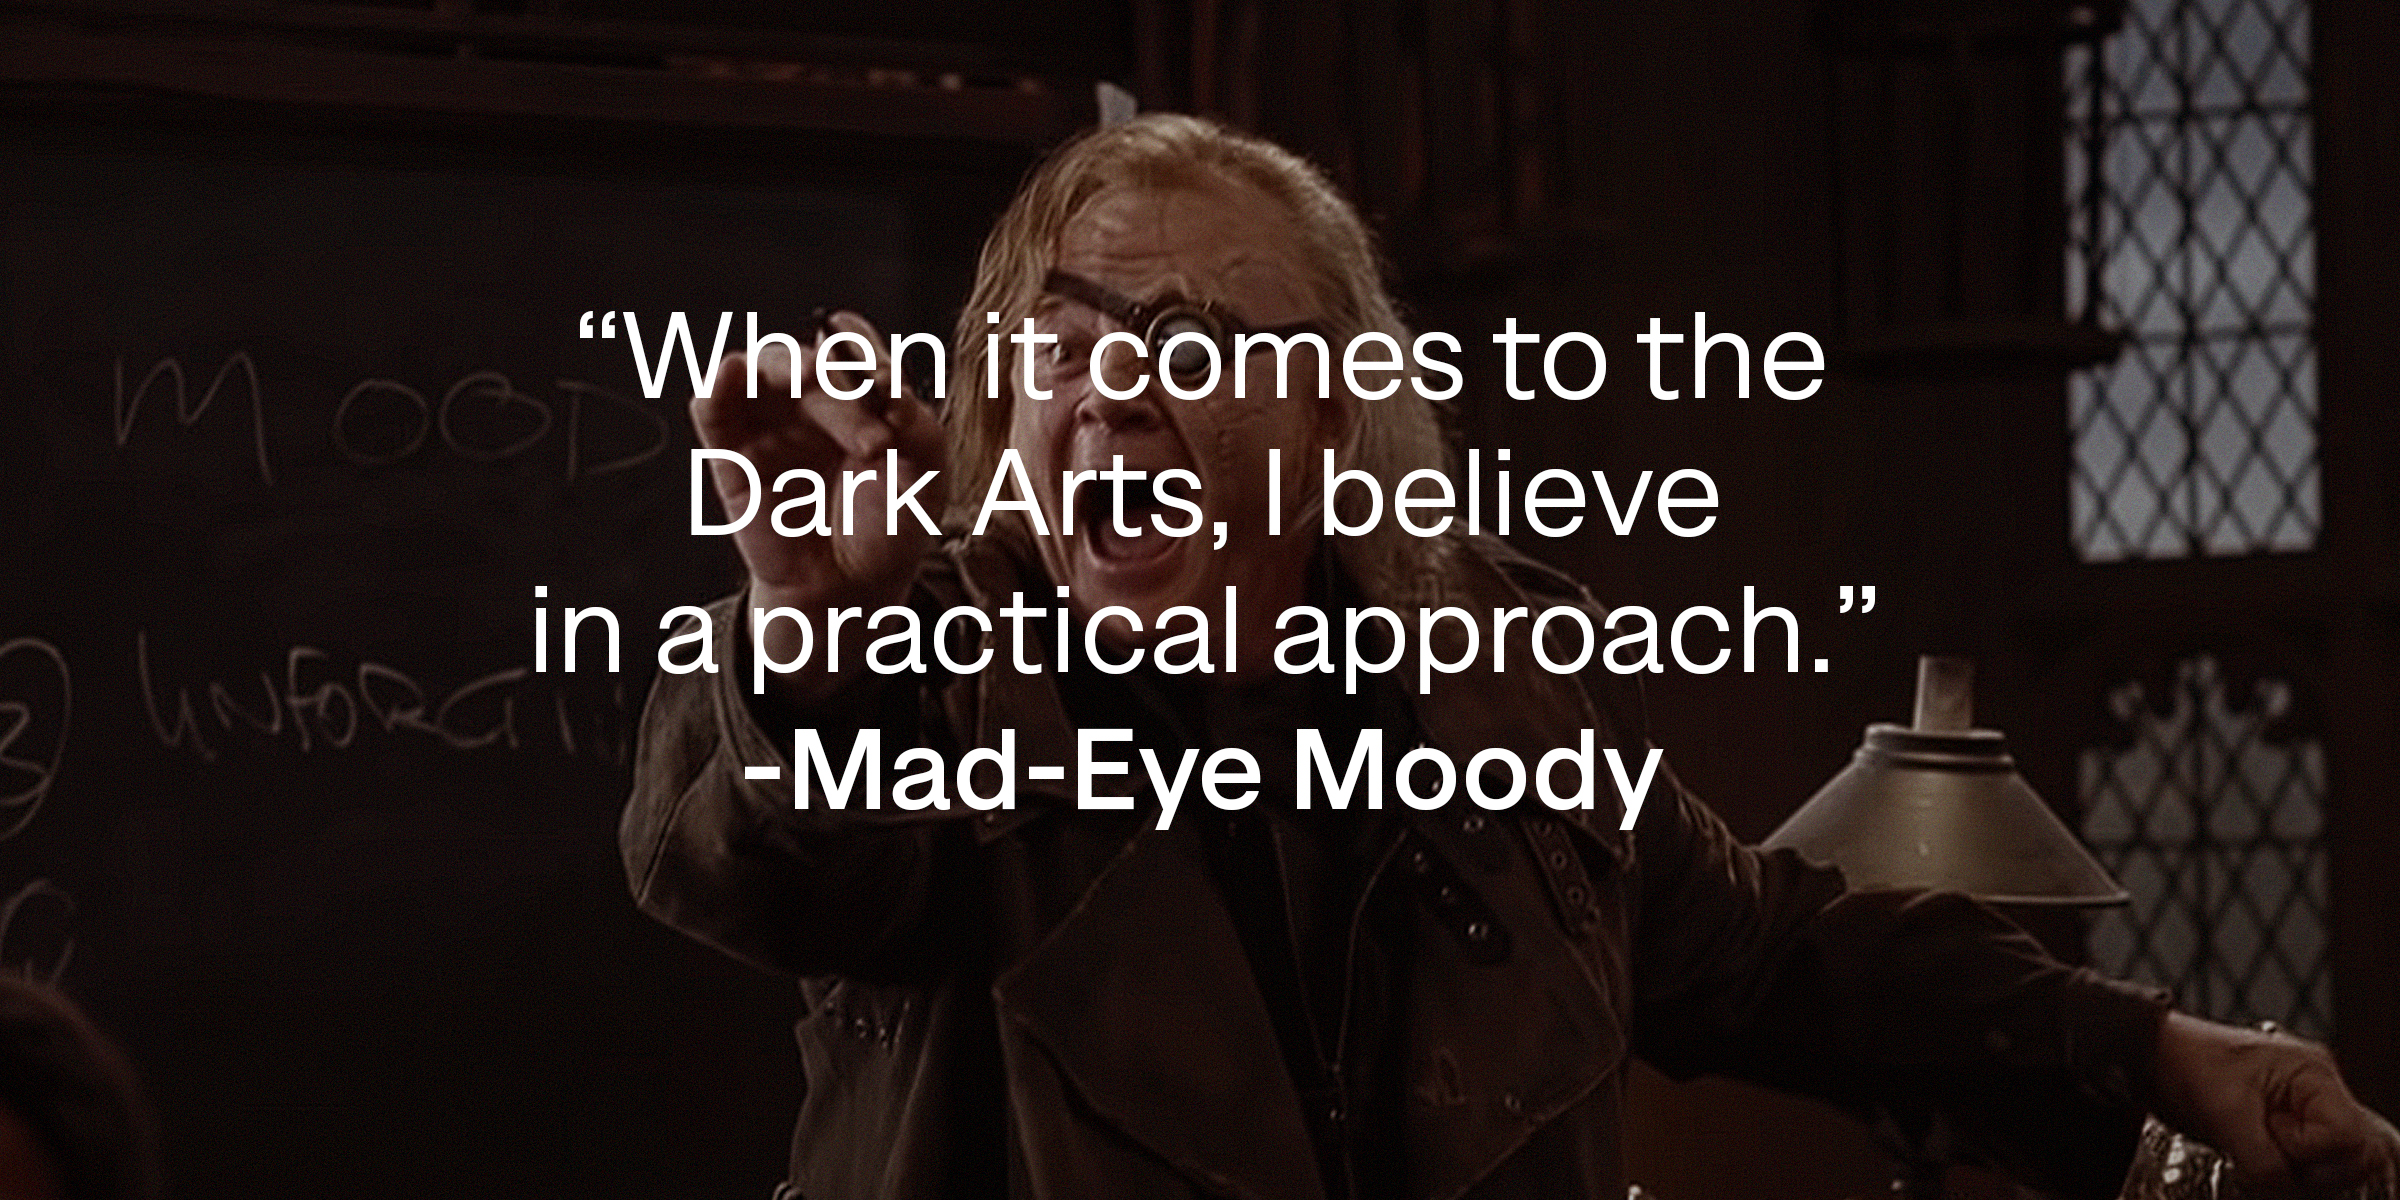 An image of Mad-Eye Moody with the quote: "When it comes to the Dark Arts, I believe in a practical approach." | Source: youtube.com/harrypotter